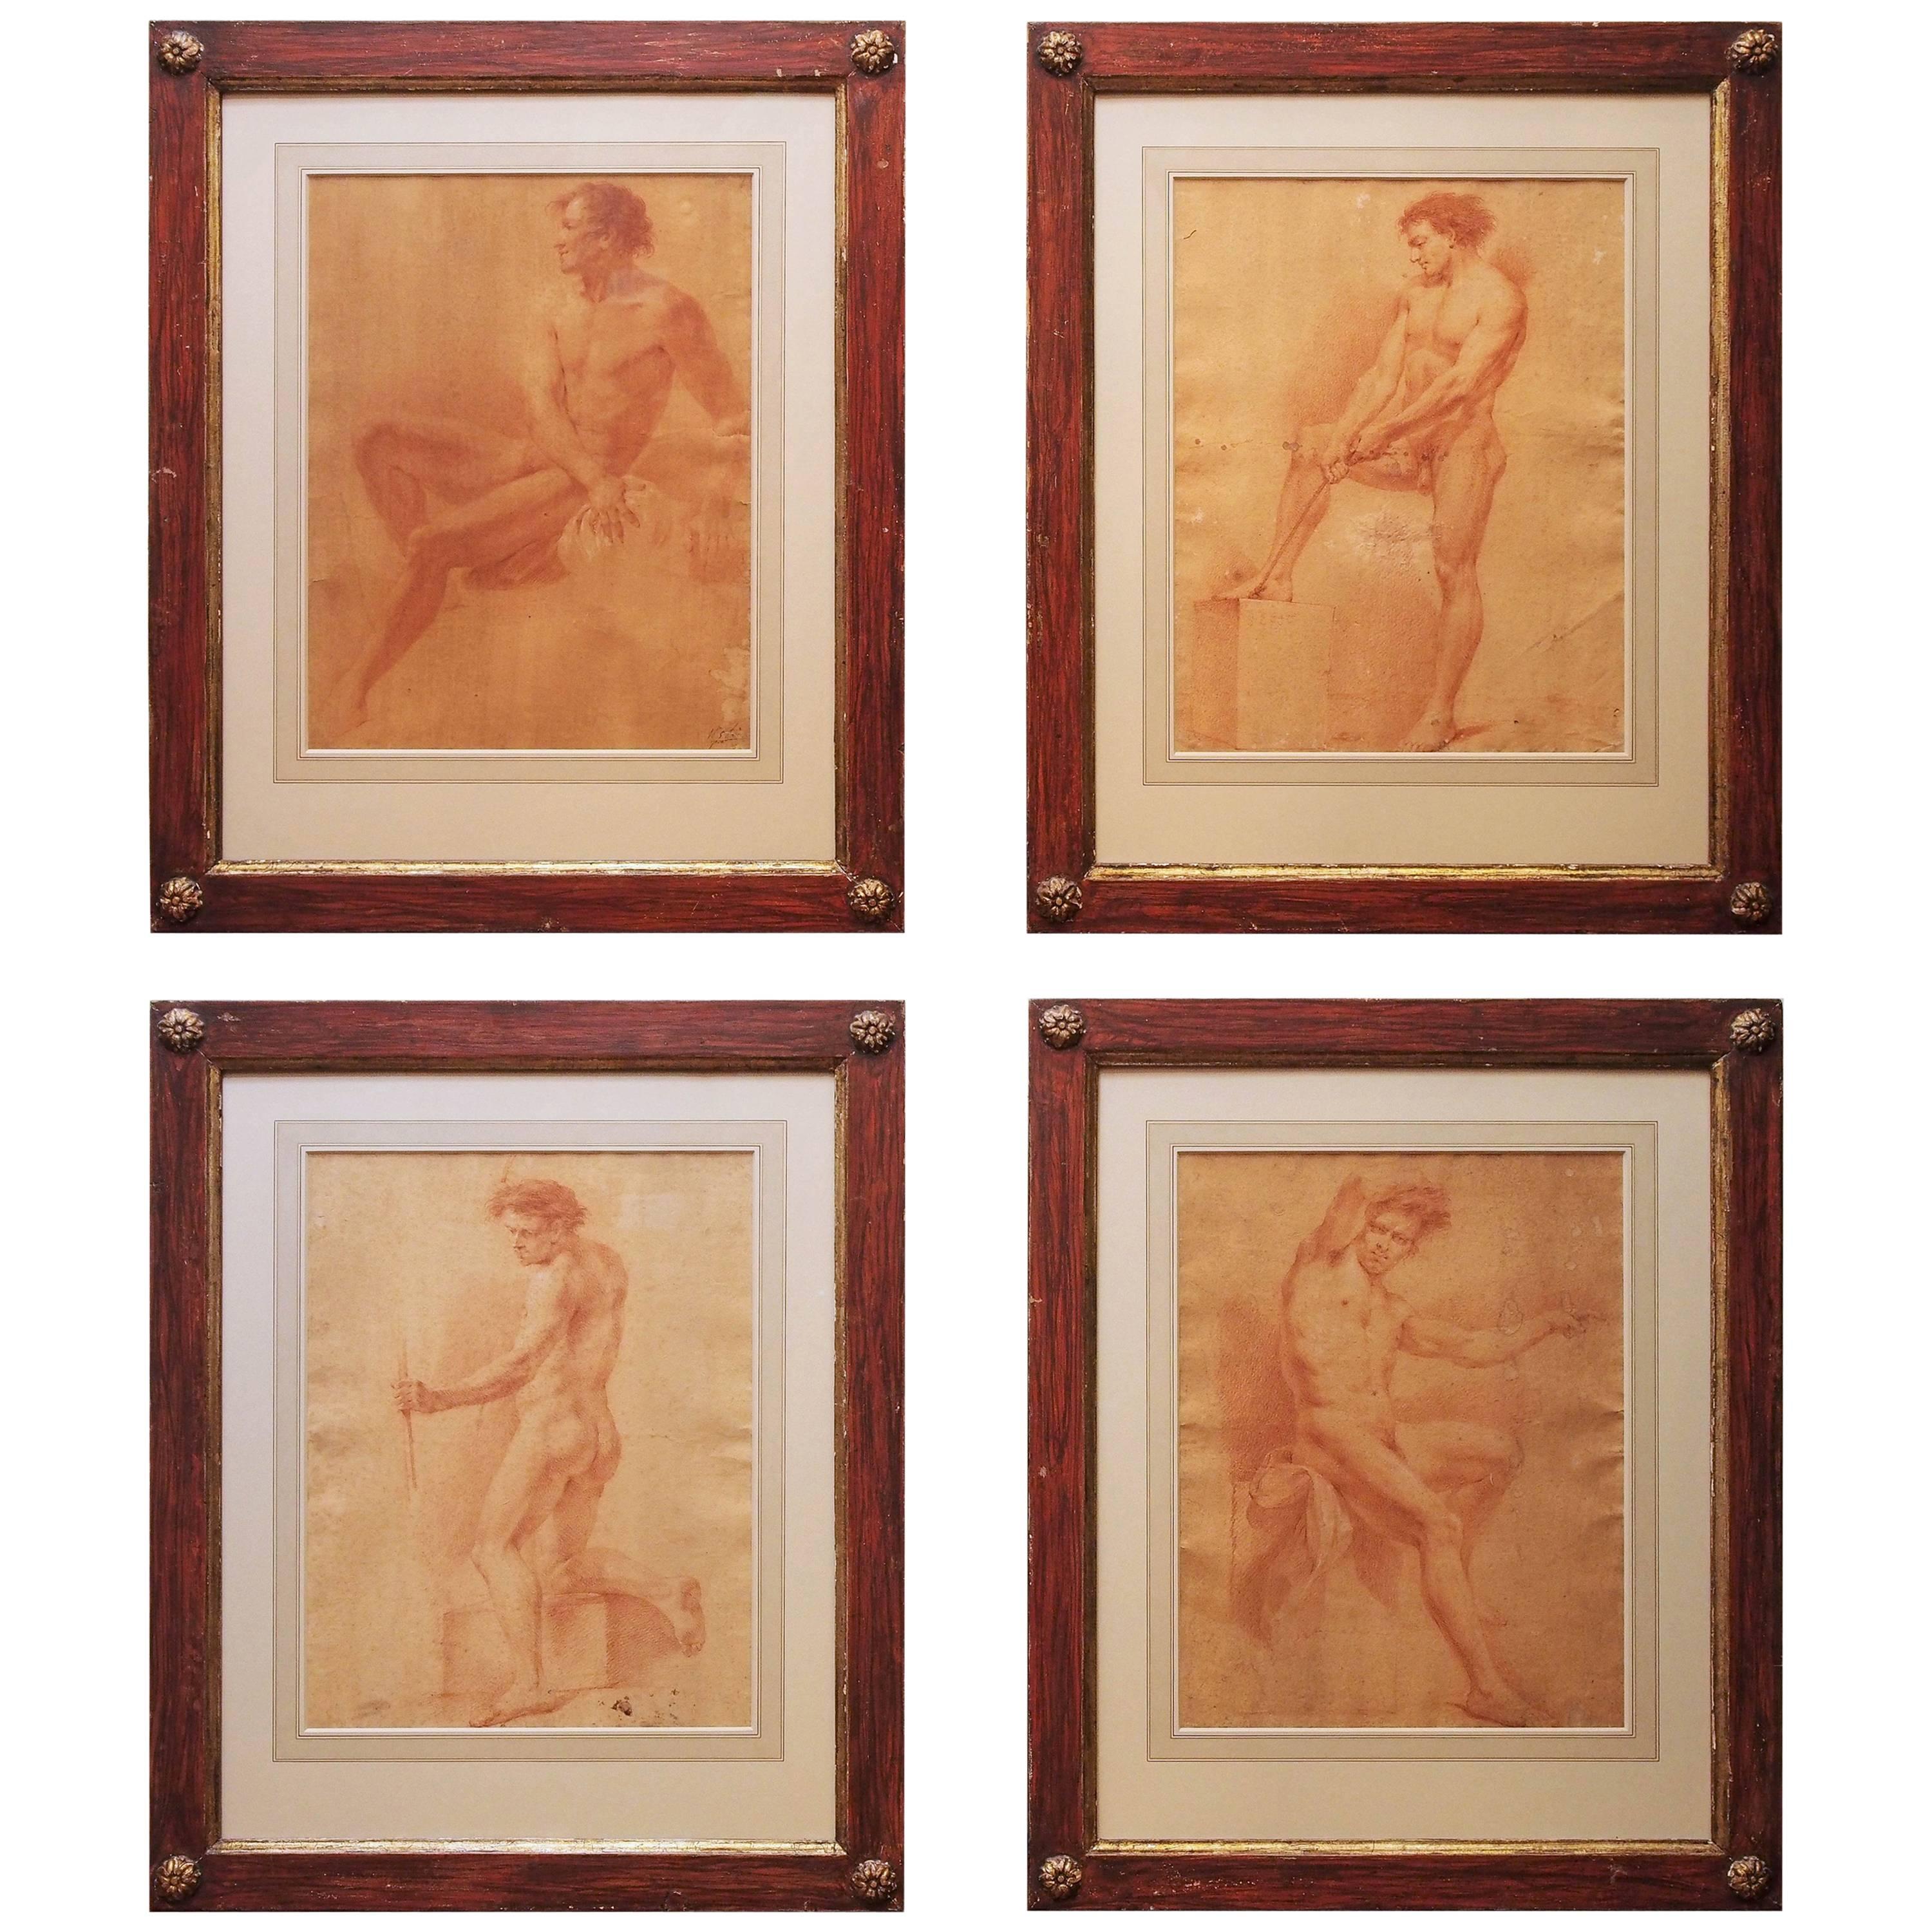 Set of Four 18th Century Sanguine Drawings of Male Nudes For Sale